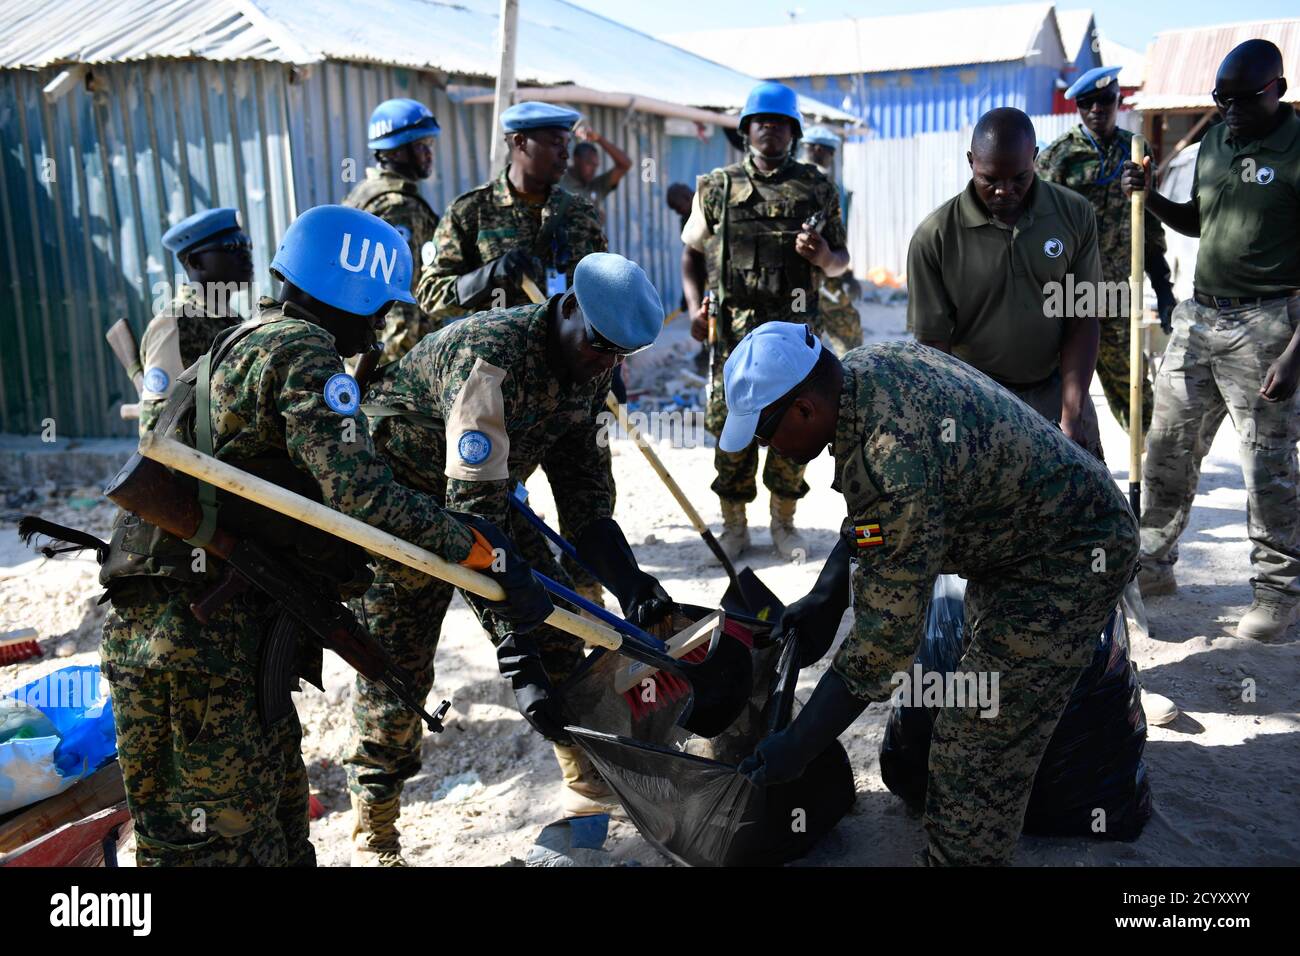 Ugandan soldiers serving under the United Nations Guard Unit in Somalia carry out a community cleanup exercise in Mogadishu, Somalia on February 06, 2019. This was part of activities organised by the Ugandan military to mark 'Tarehe Sita' day in commemoration of the 38th anniversary of the founding of the Uganda People's Defence Forces (UPDF) on 06 February 1981. Stock Photo